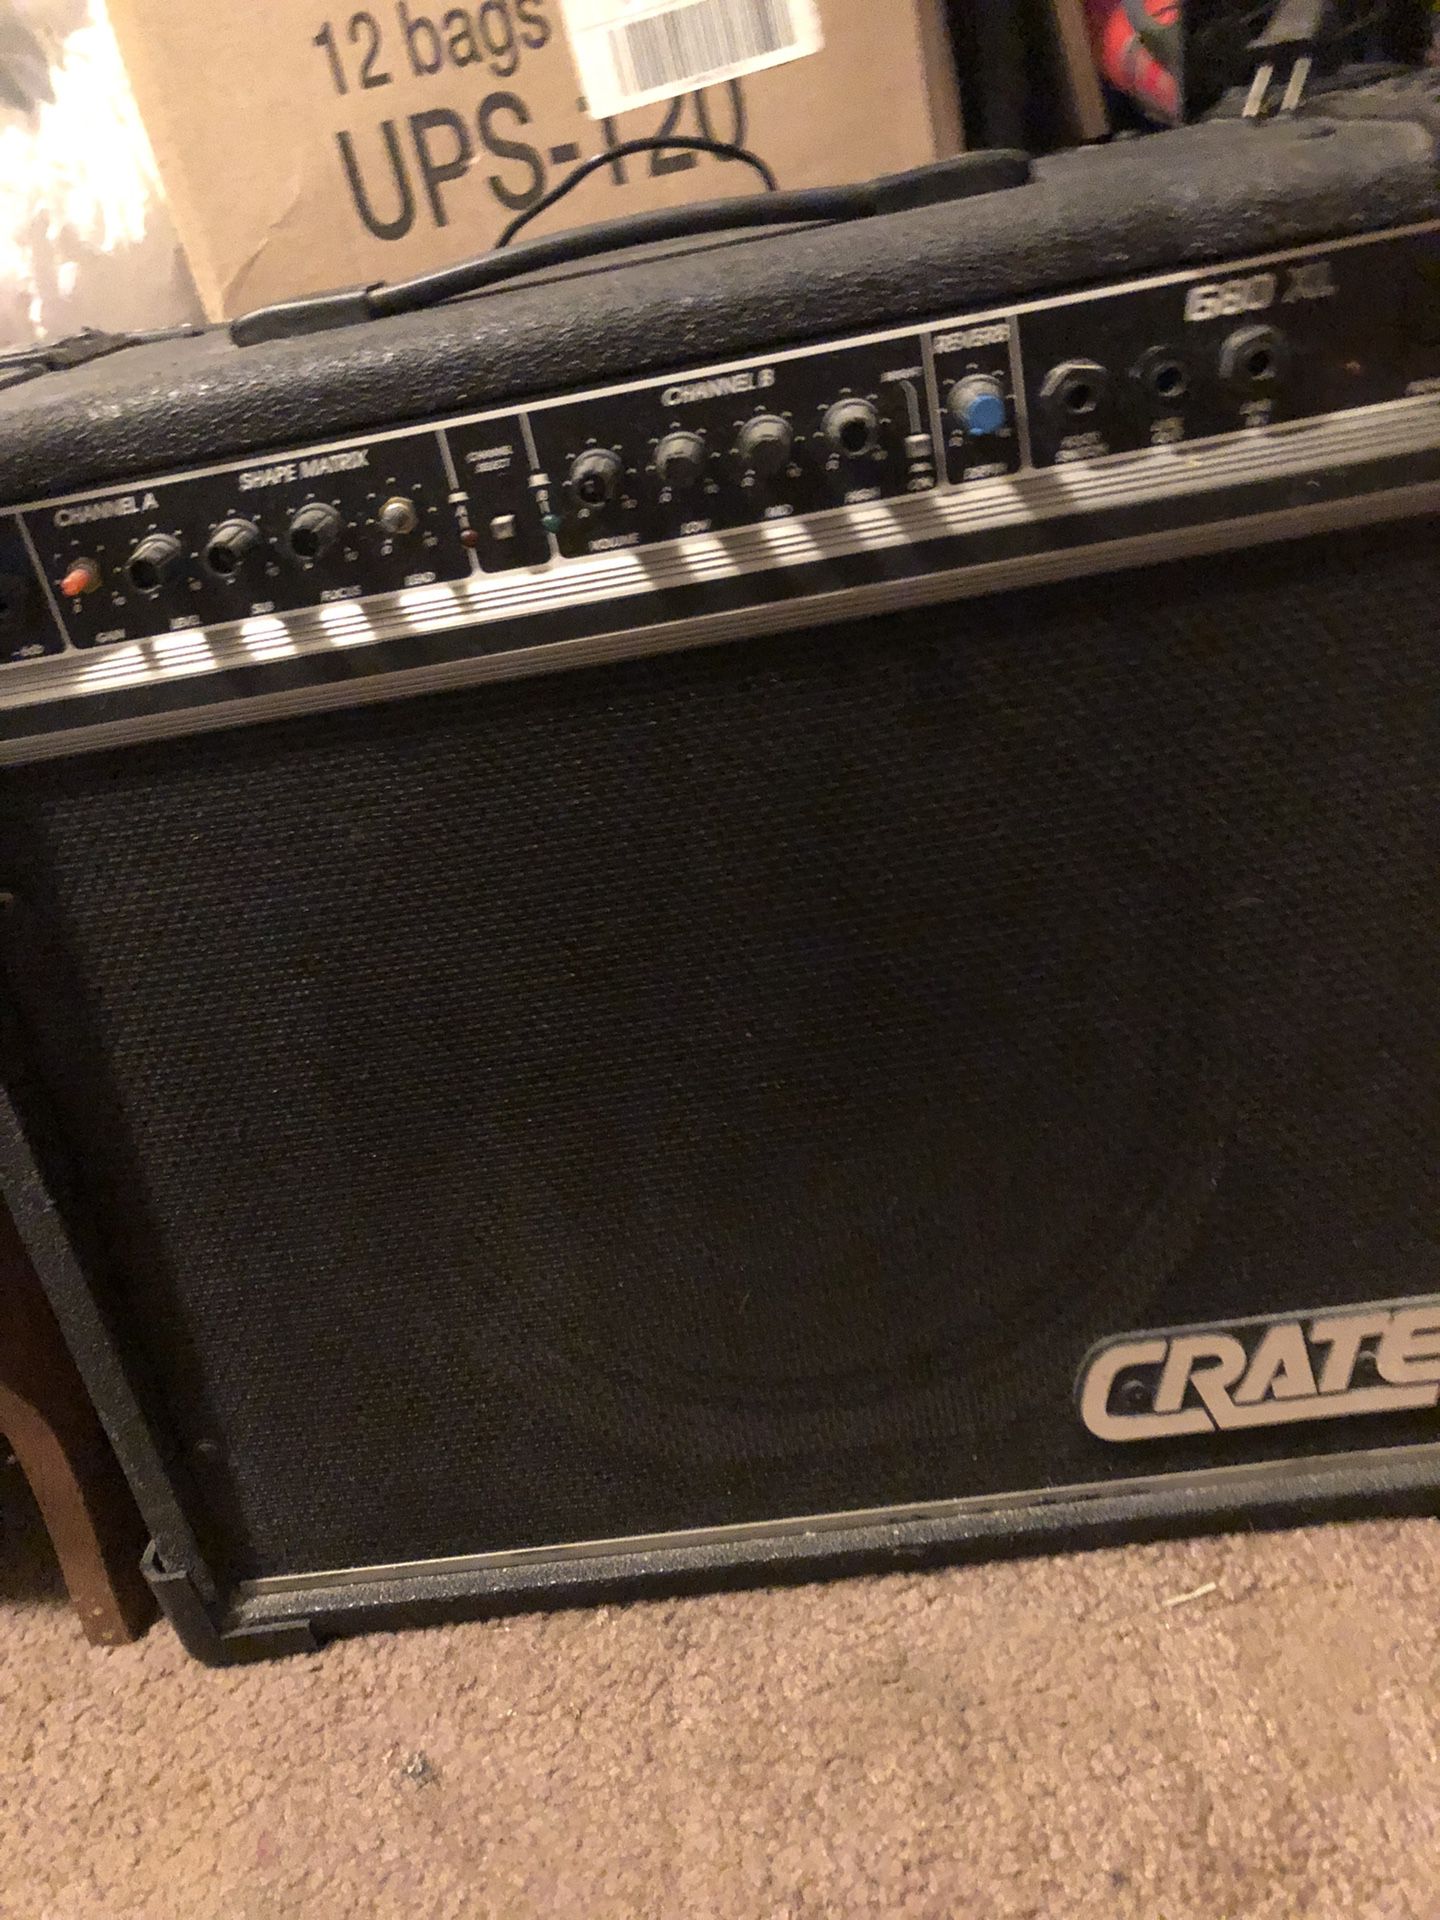 Crate Amplifier For Sale $100